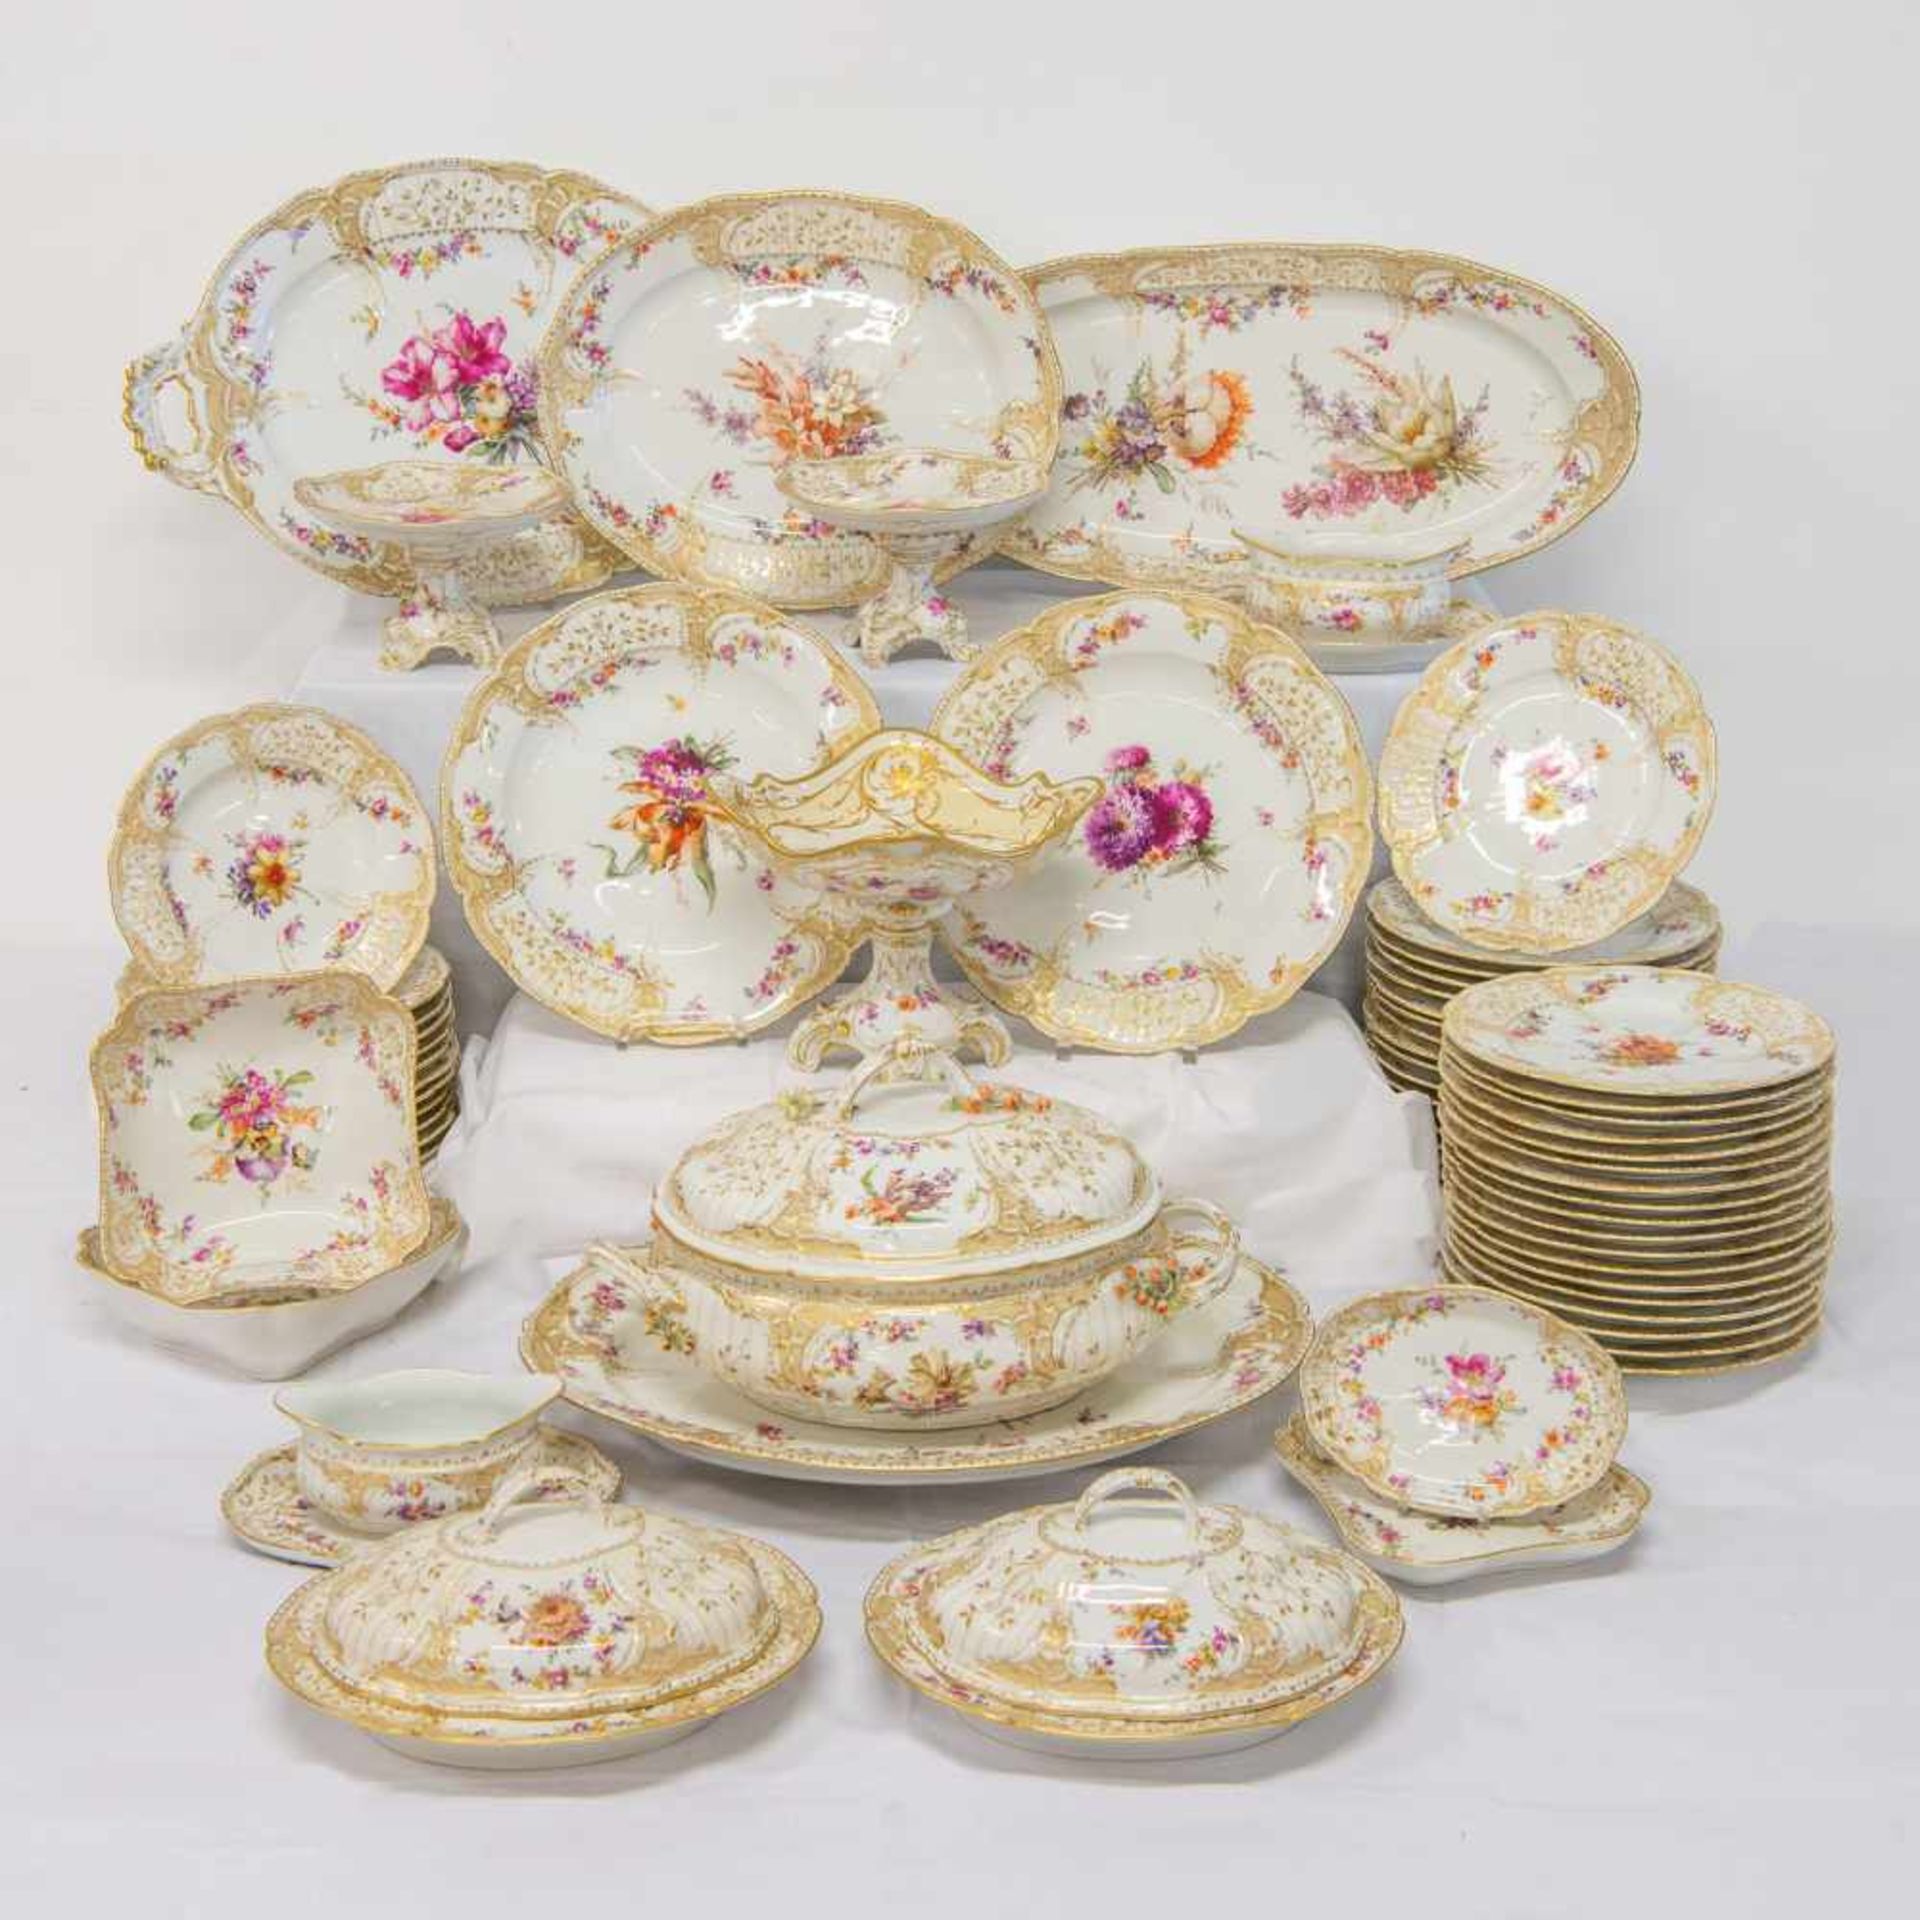 Exceptional dinner service of 66 pieces, handpainted decorations, Marked KPM. (1 small chip) Length: